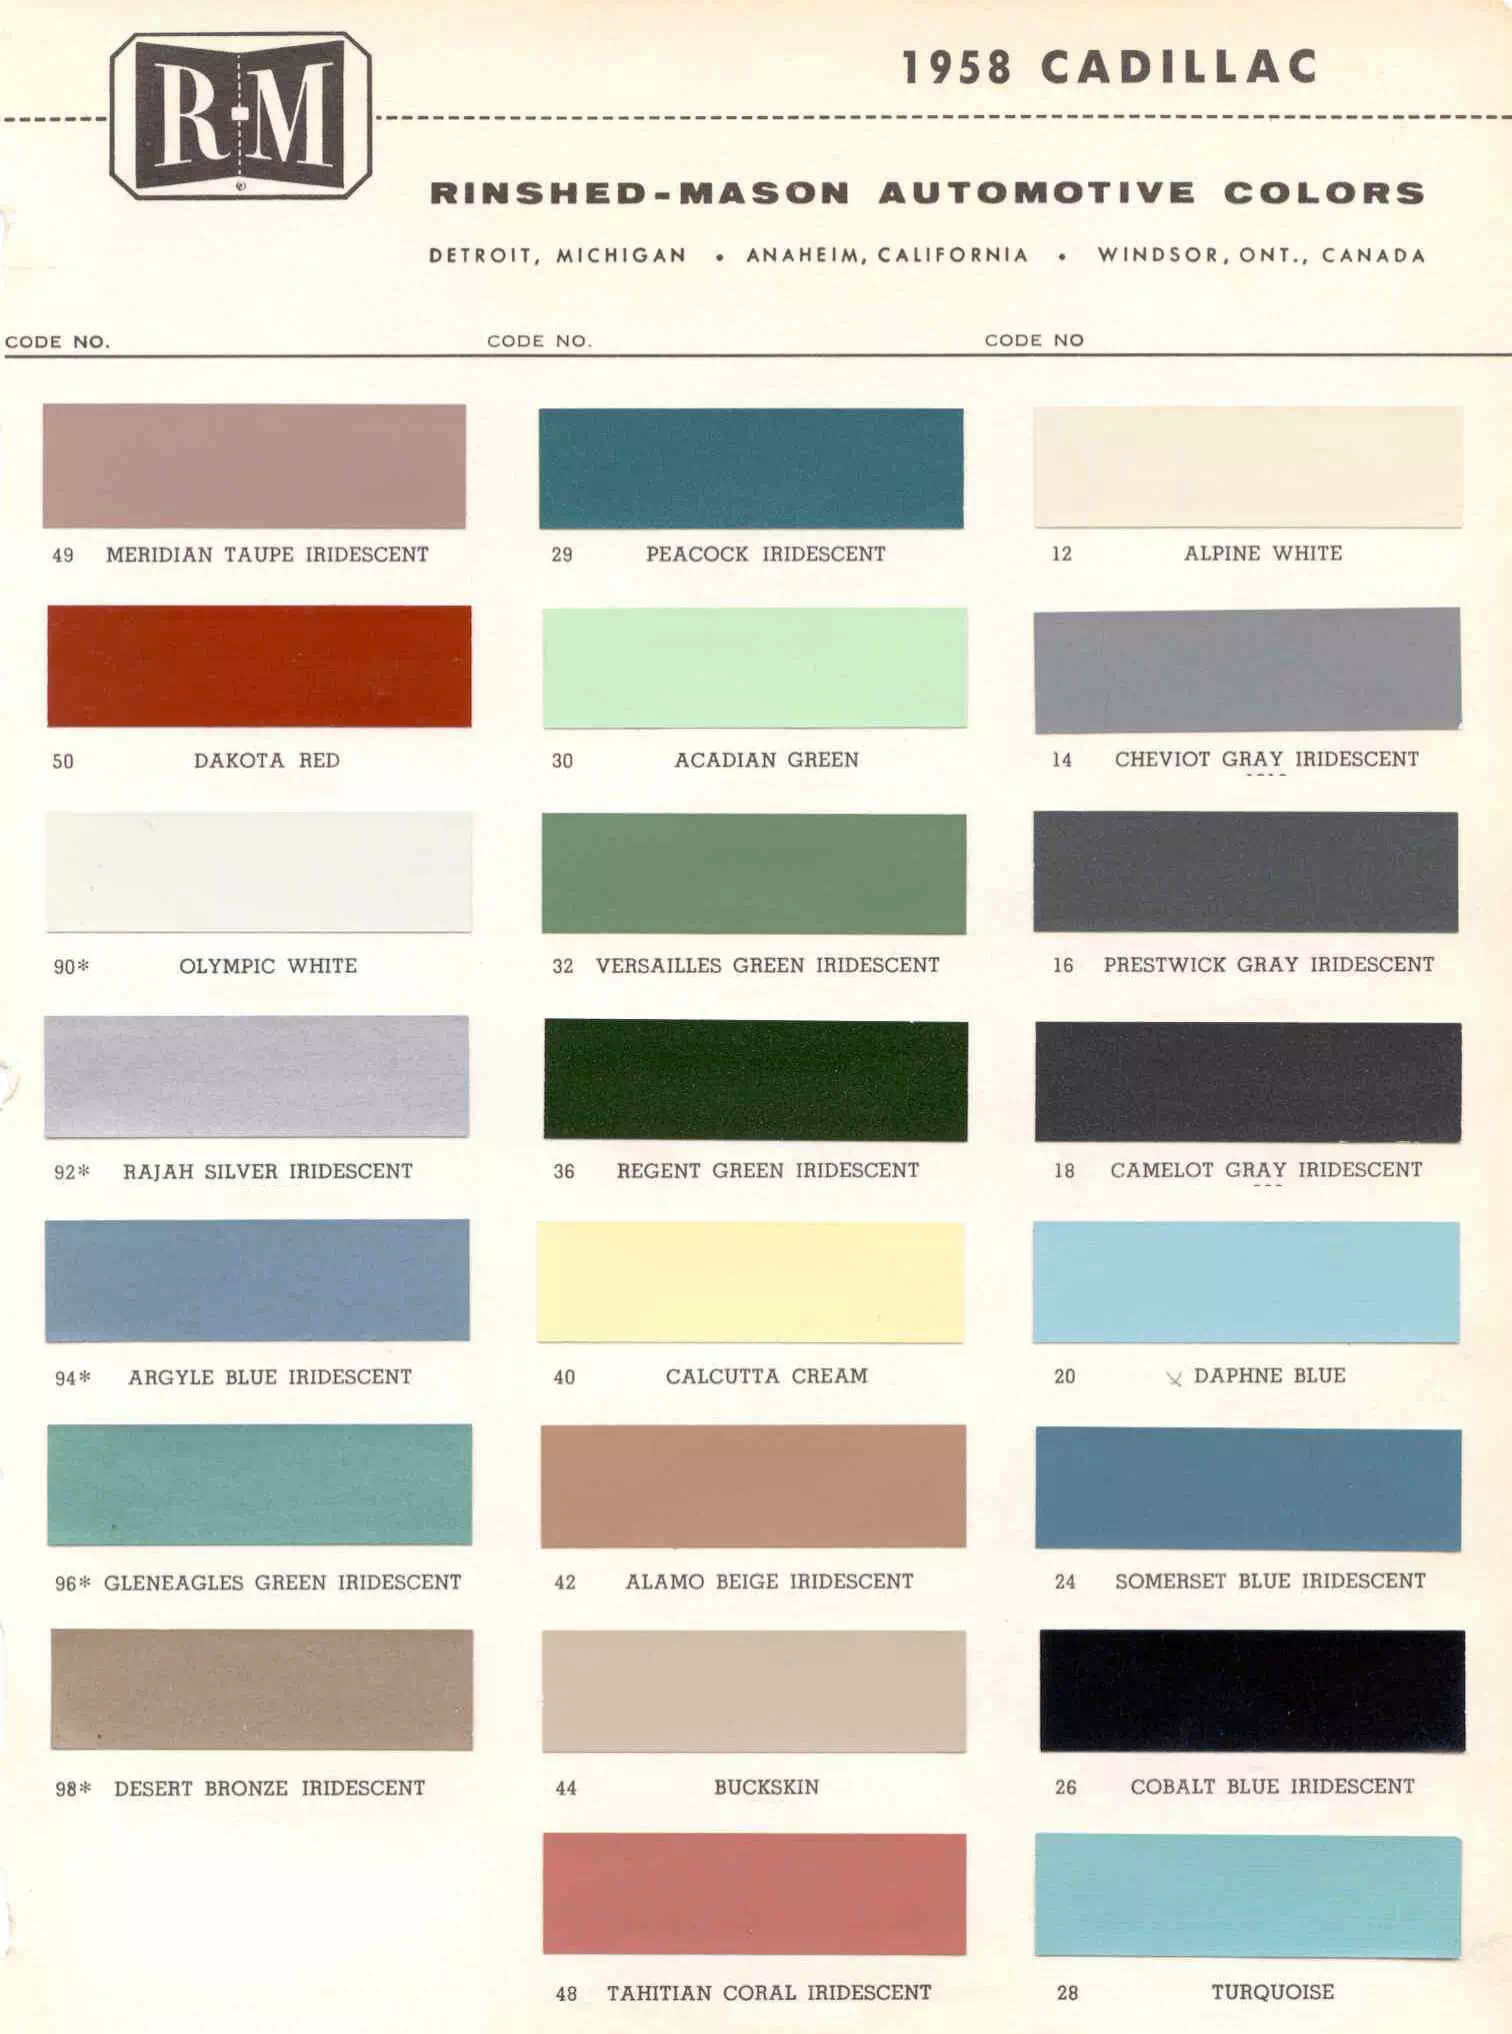 Colors used on all Cadillacs in 1958